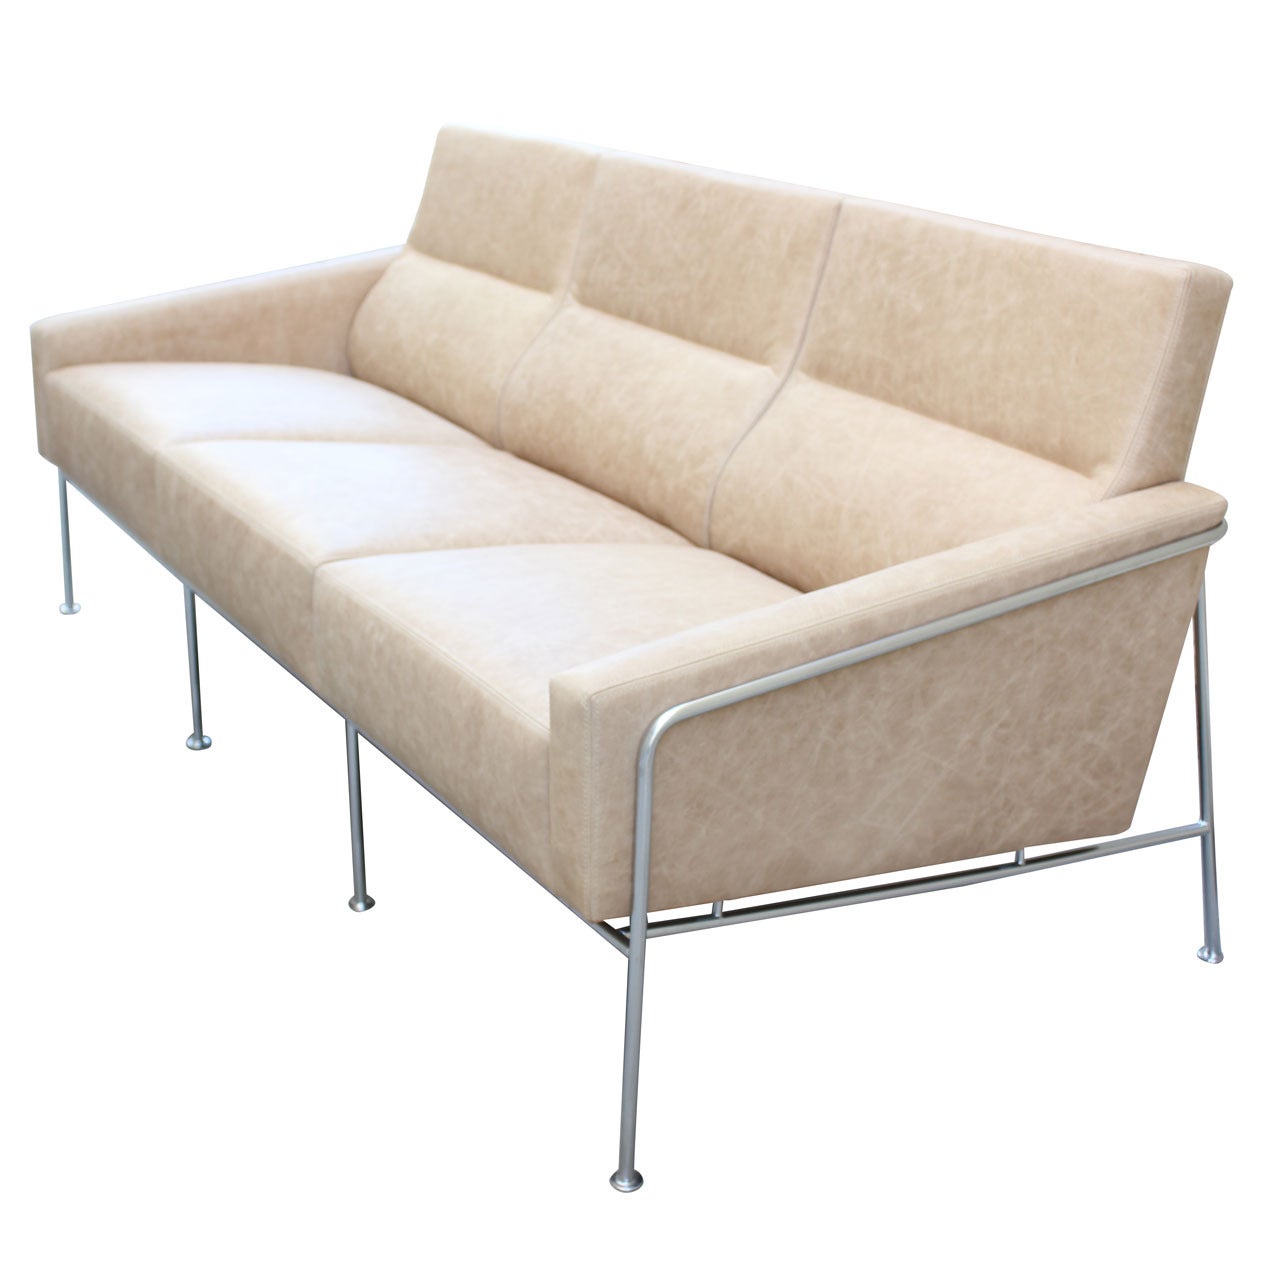 Arne Jacobsen 3300 Leather and Steel Sofa For Sale